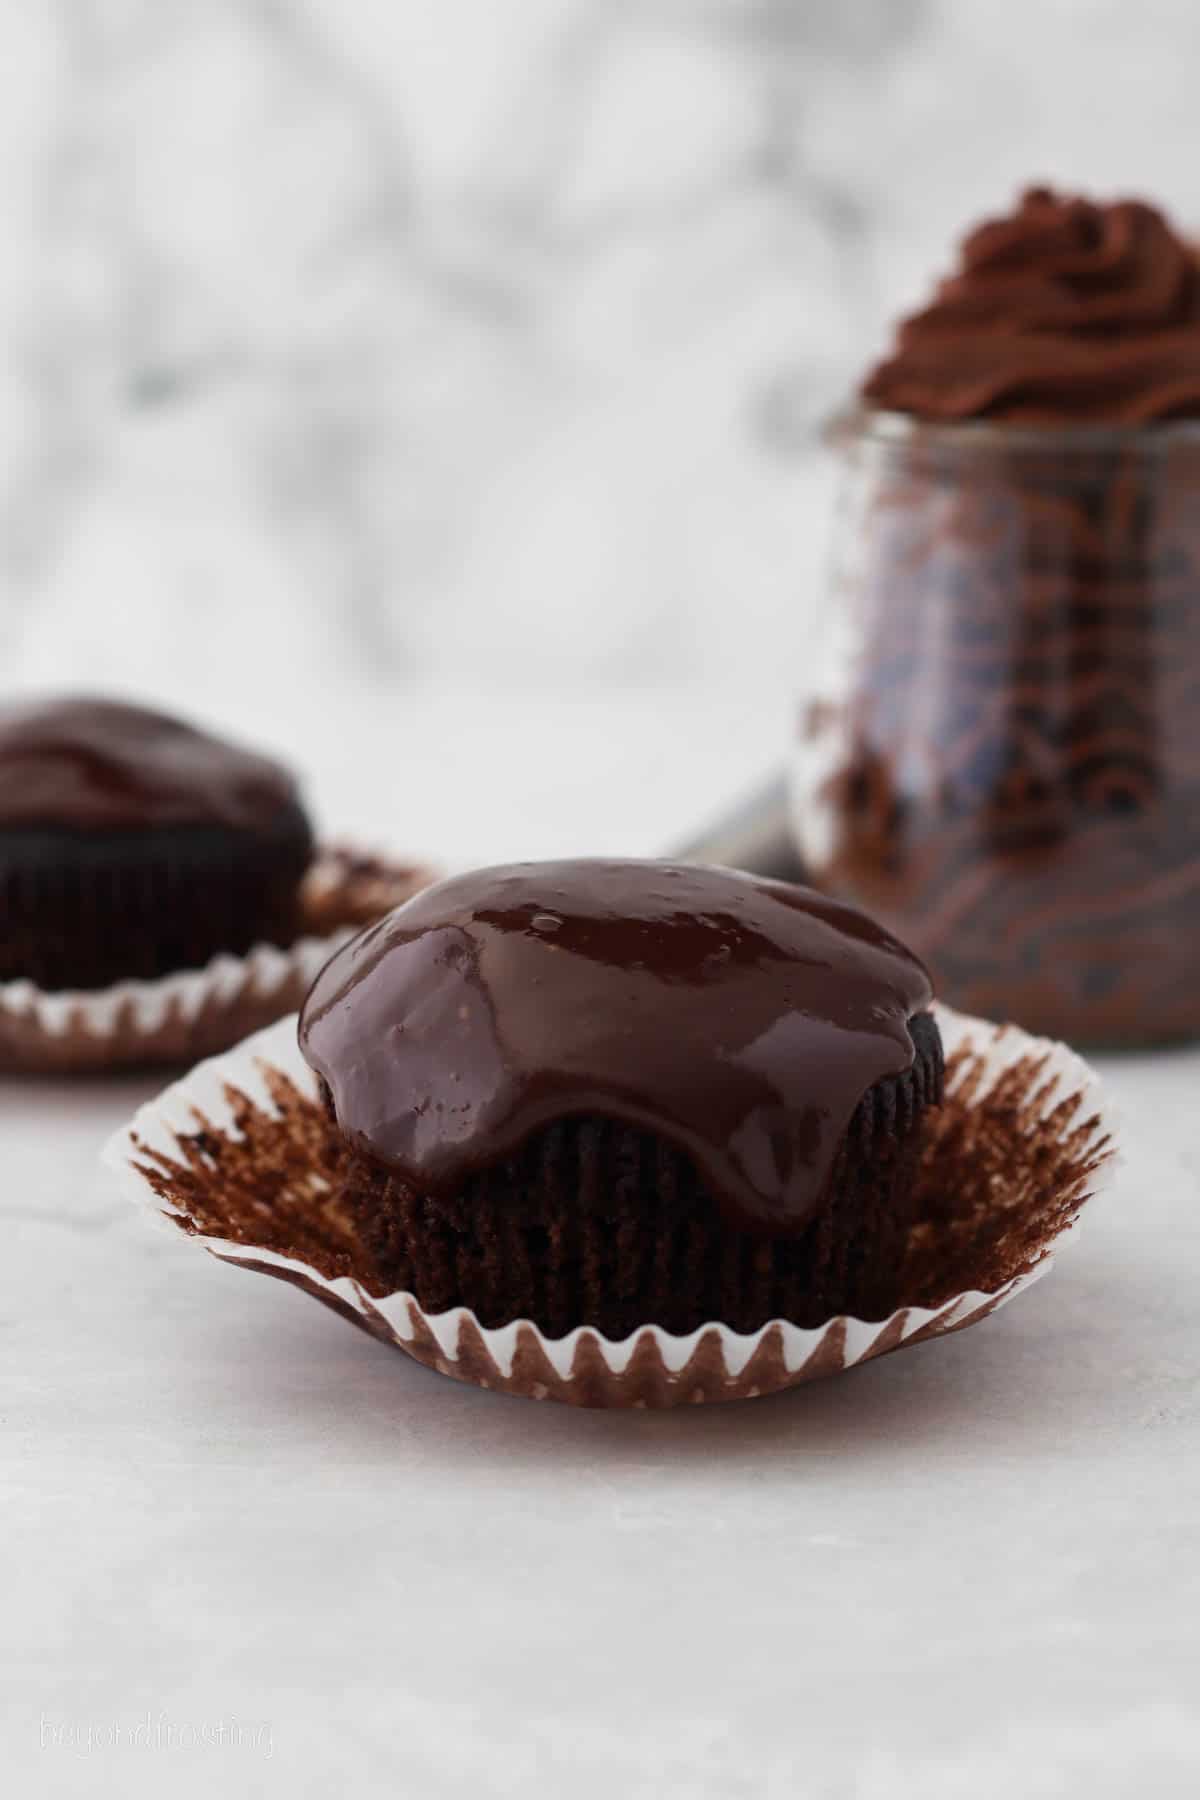 An unwrapped chocolate cupcake covered with chocolate ganache on a countertop.